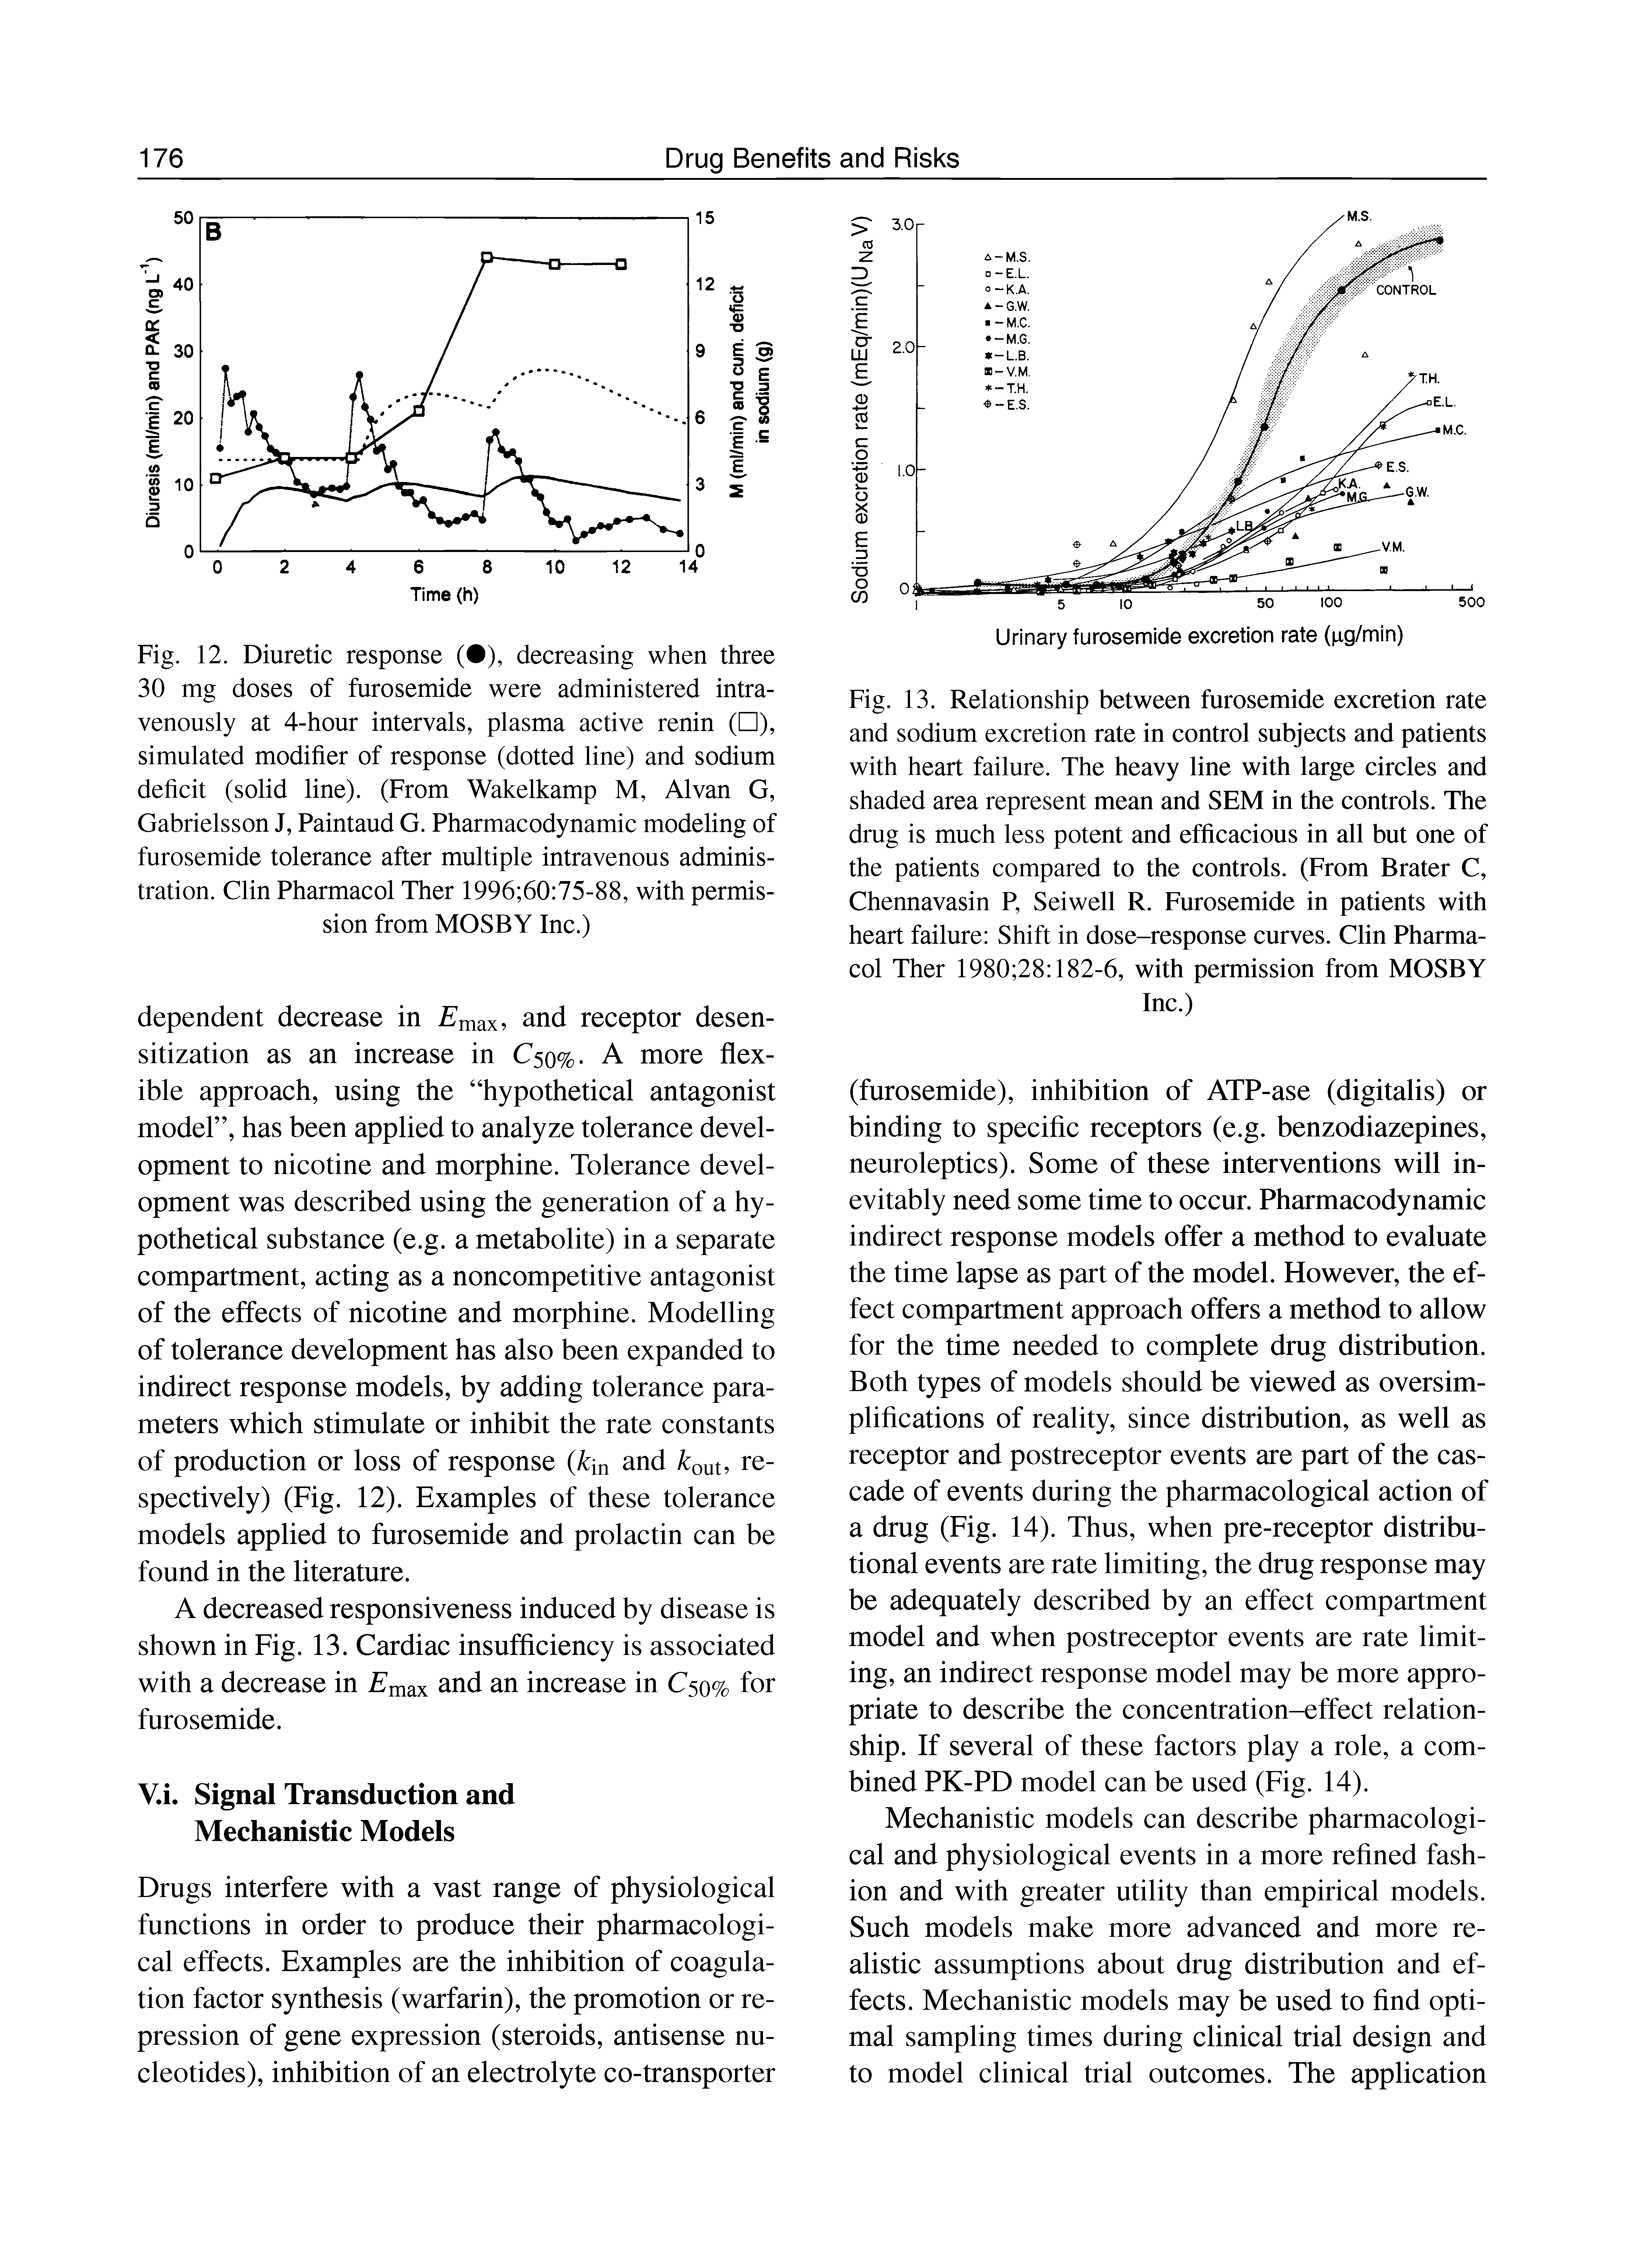 Fig. 13. Relationship between furosemide excretion rate and sodium excretion rate in control subjects and patients with heart failure. The heavy line with large circles and shaded area represent mean and SEM in the controls. The drug is much less potent and efficacious in all but one of the patients compared to the controls. (From Brater C, Chennavasin P, Sdwell R. Furosemide in patients with heart failure Shift in dose-response curves. Clin Pharmacol Ther 1980 28 182-6, with permission from MOSBY Inc.)...